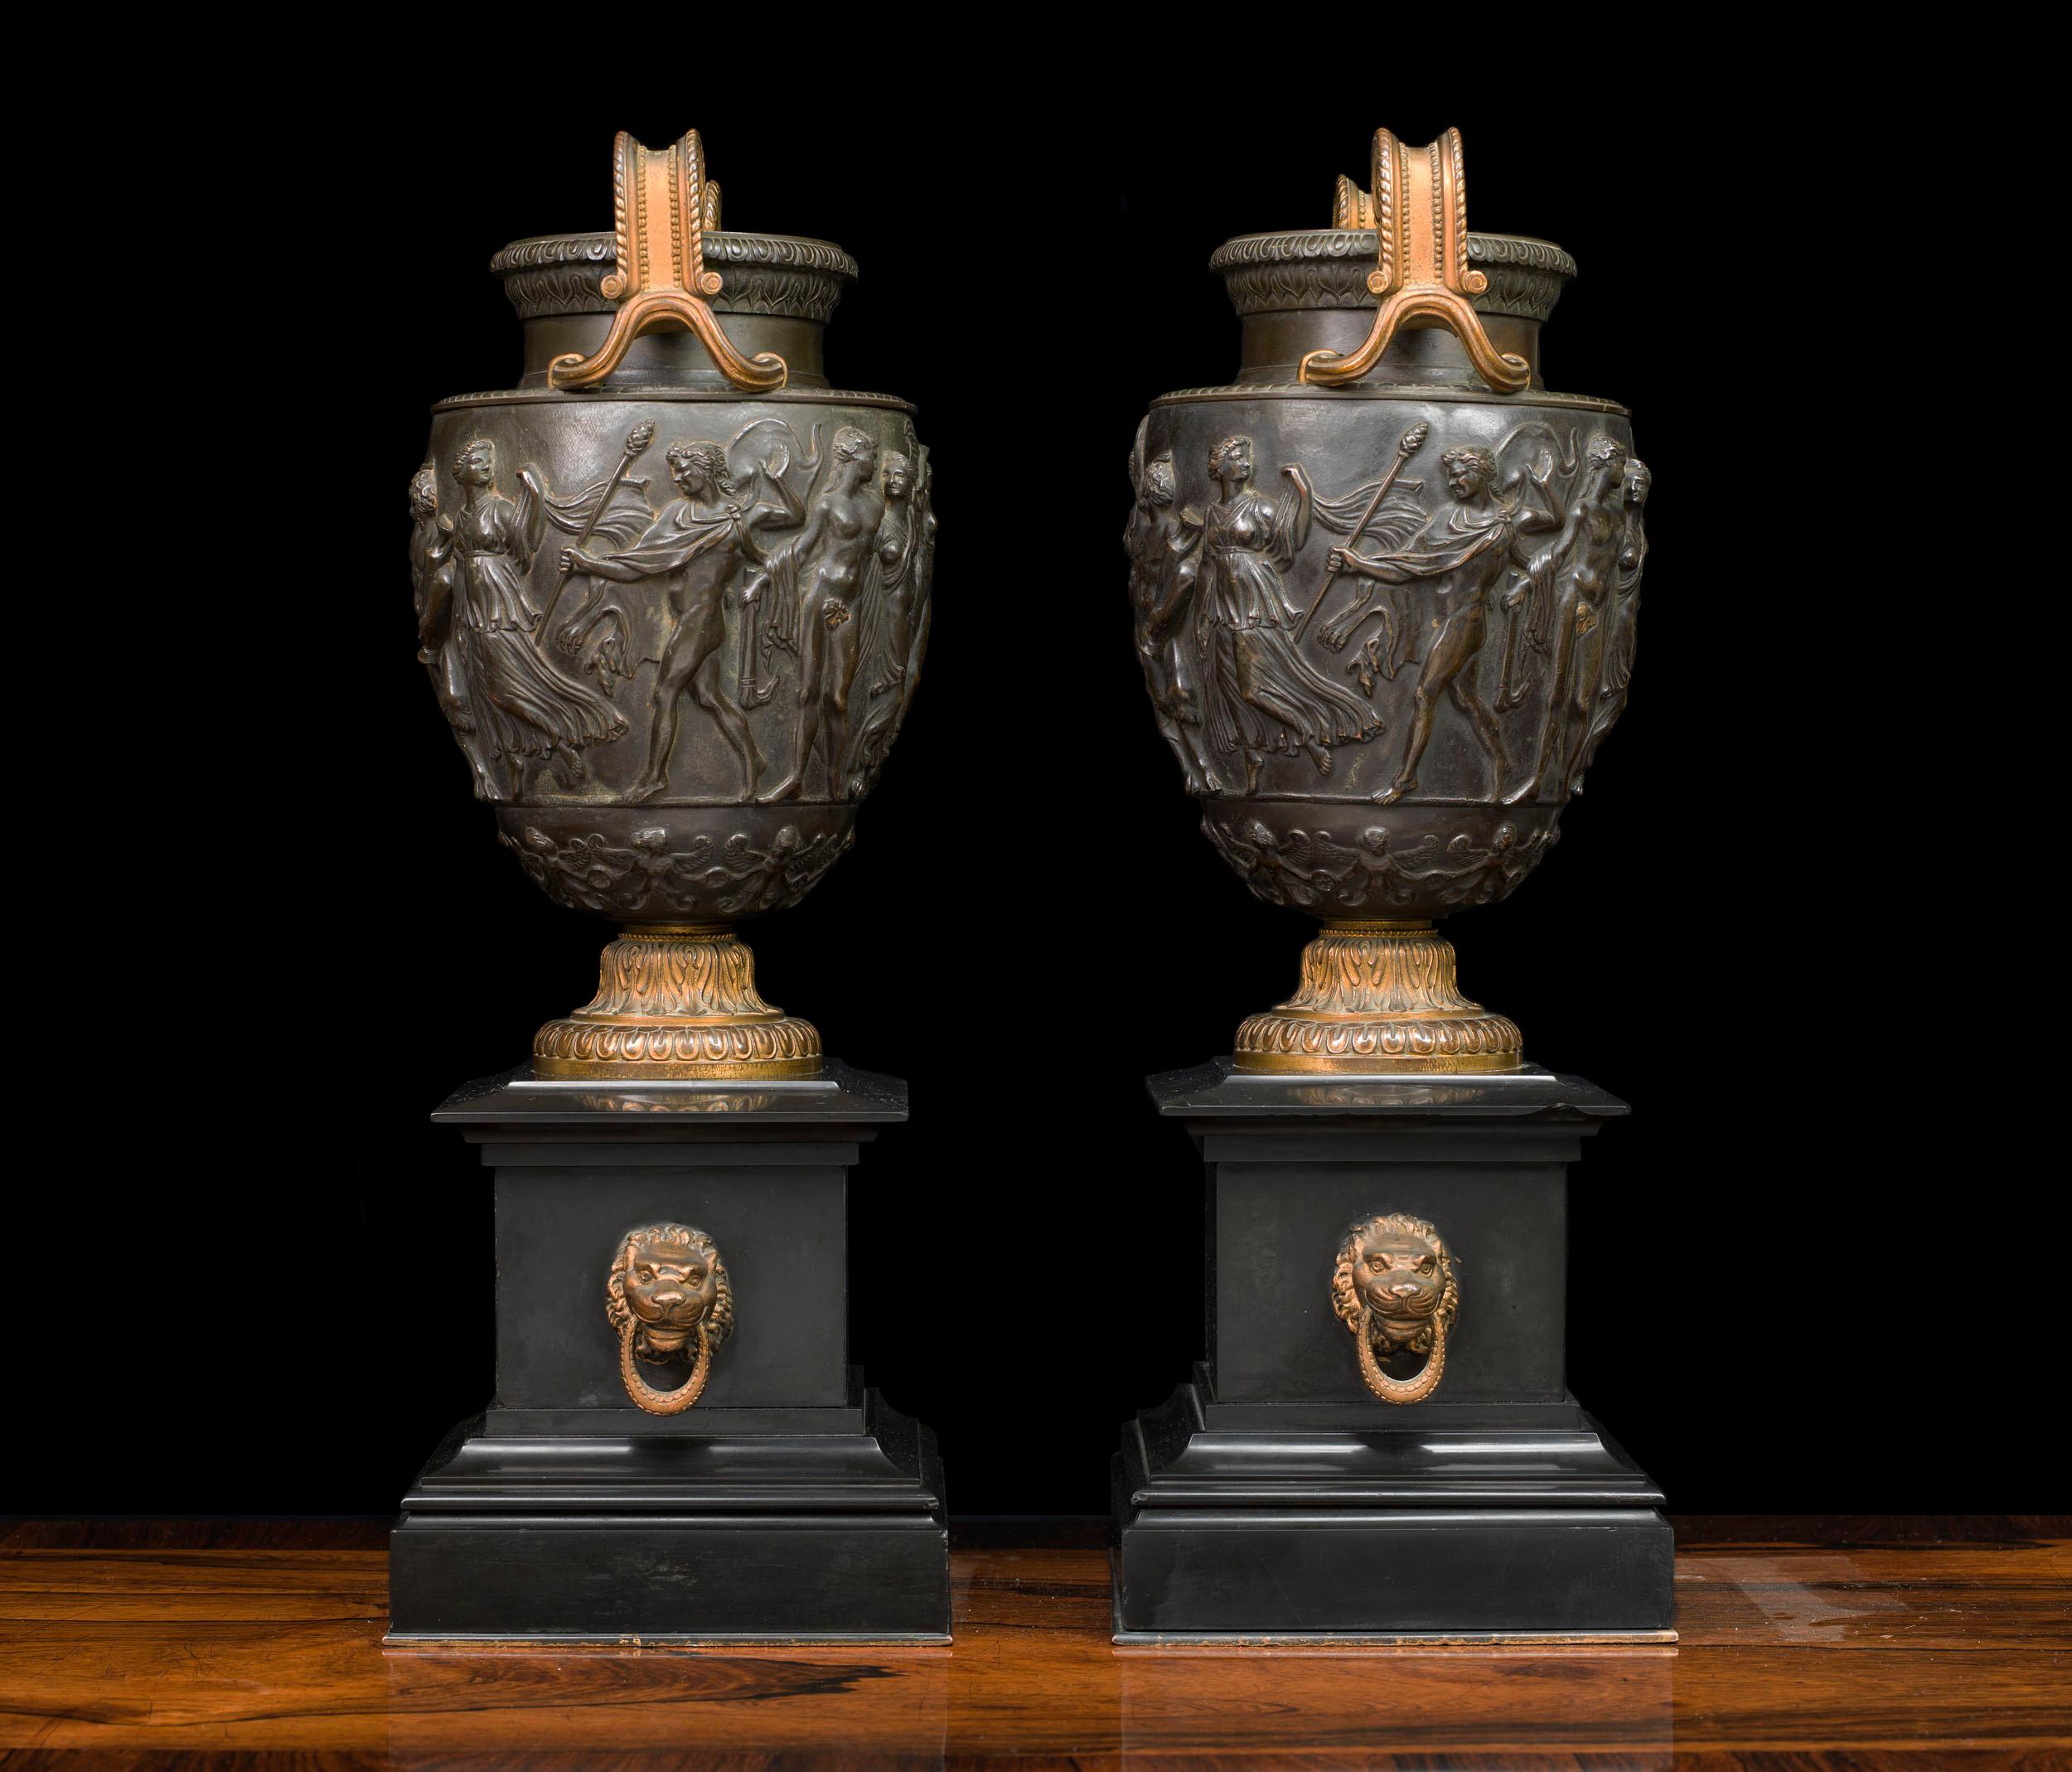 A very fine pair of bronze vases, taking the form of the Townley Vase. The vases are modelled on a krater, a Greek vessel used for mixing water and wine. Each vase has elegantly scrolling bifurcated gilt handles, and the body of the vases are cast